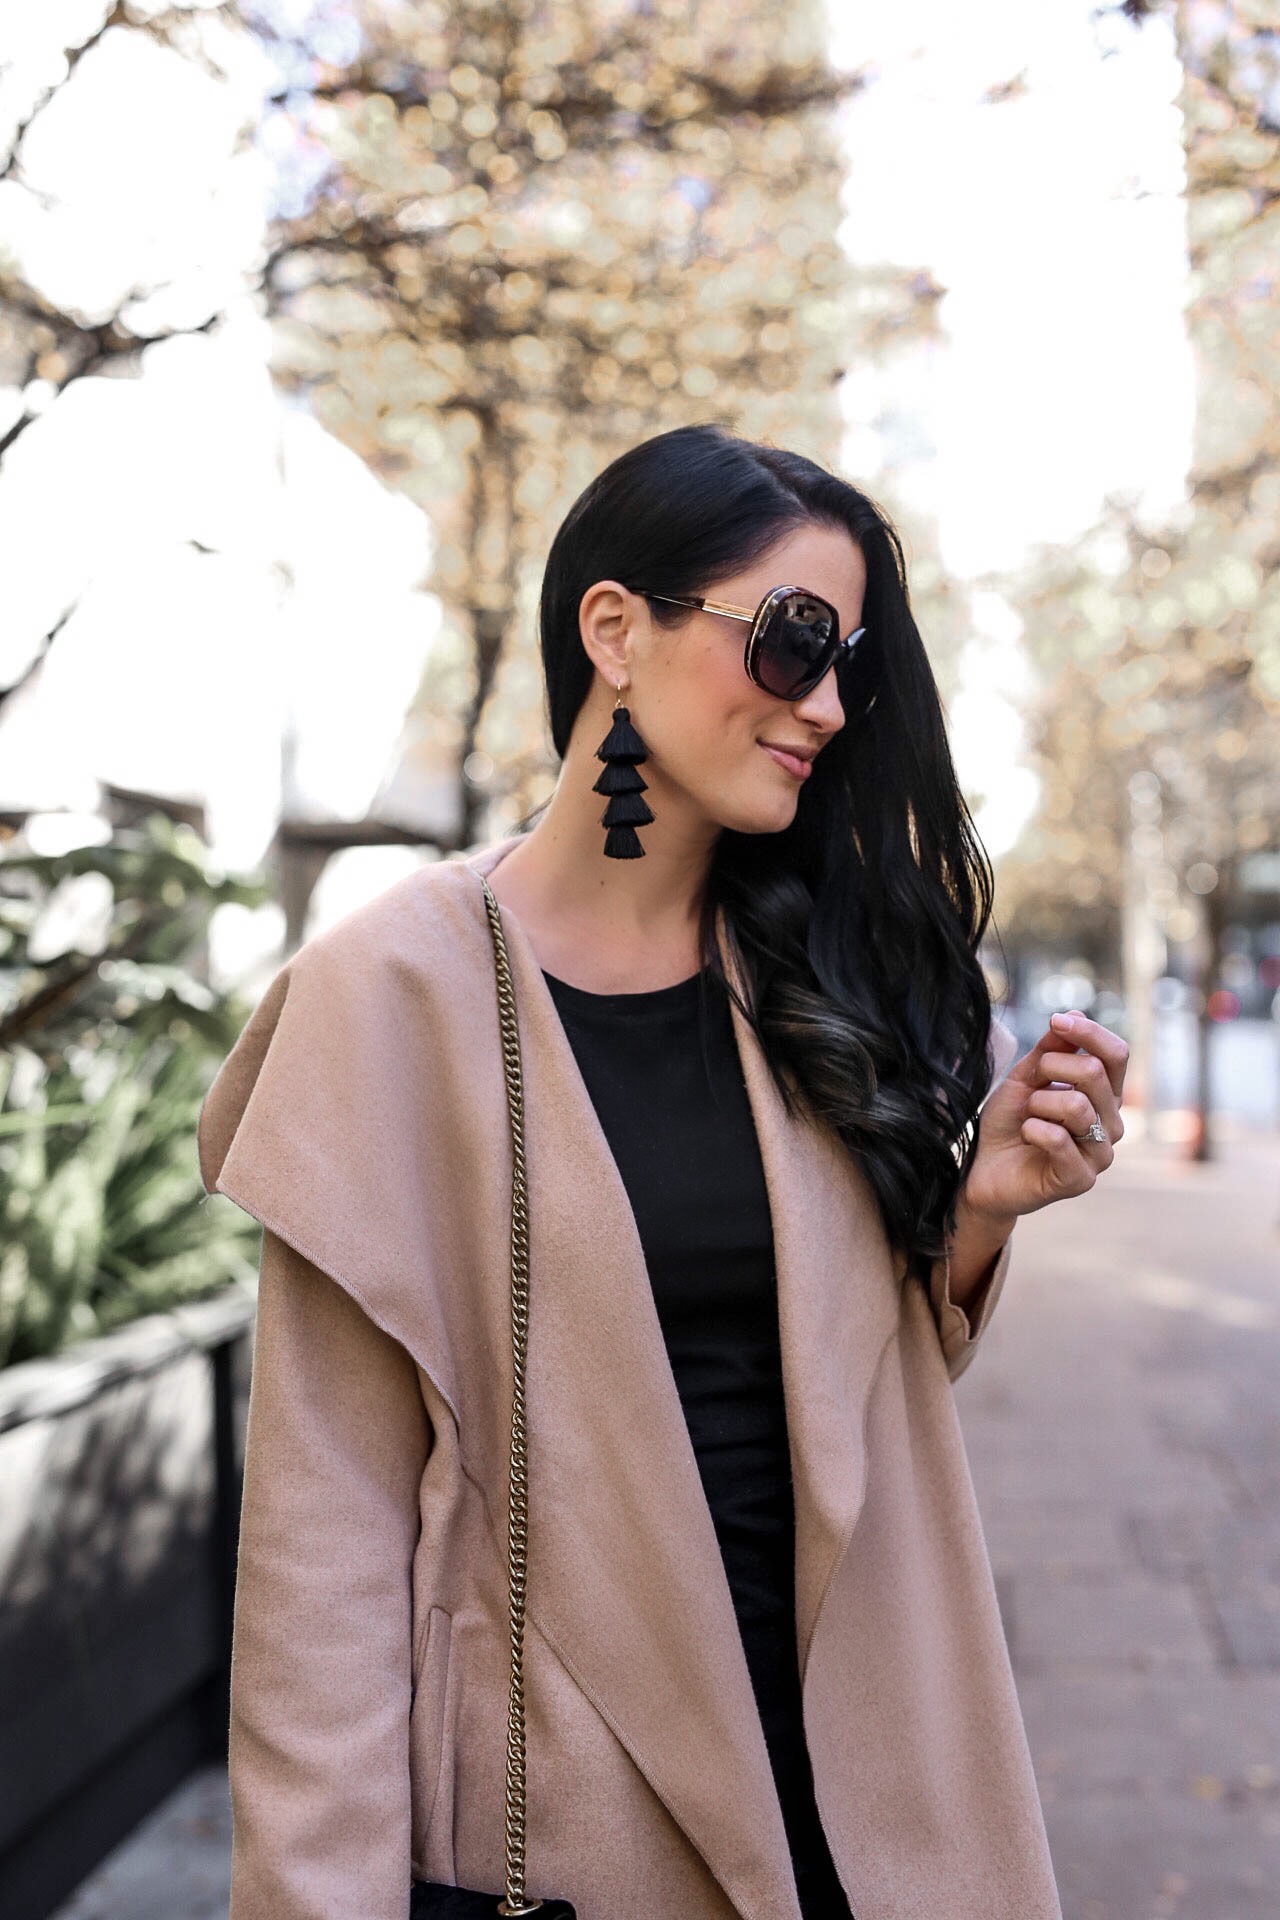 DTKAustin shares her top affordable coats from Chicwish that are under $100. Handbag from Henri Bendel, OTK boots from Goodnight Macaroon. | winter coats for women | how to style winter coats | affordable winter coats | winter style tips | winter fashion tips || Dressed to Kill #wintercoats #affordablewinterfashion #winterfashion -  10 Must-Have Classic Affordable Coats for Winter by Austin fashion blogger Dressed to Kill